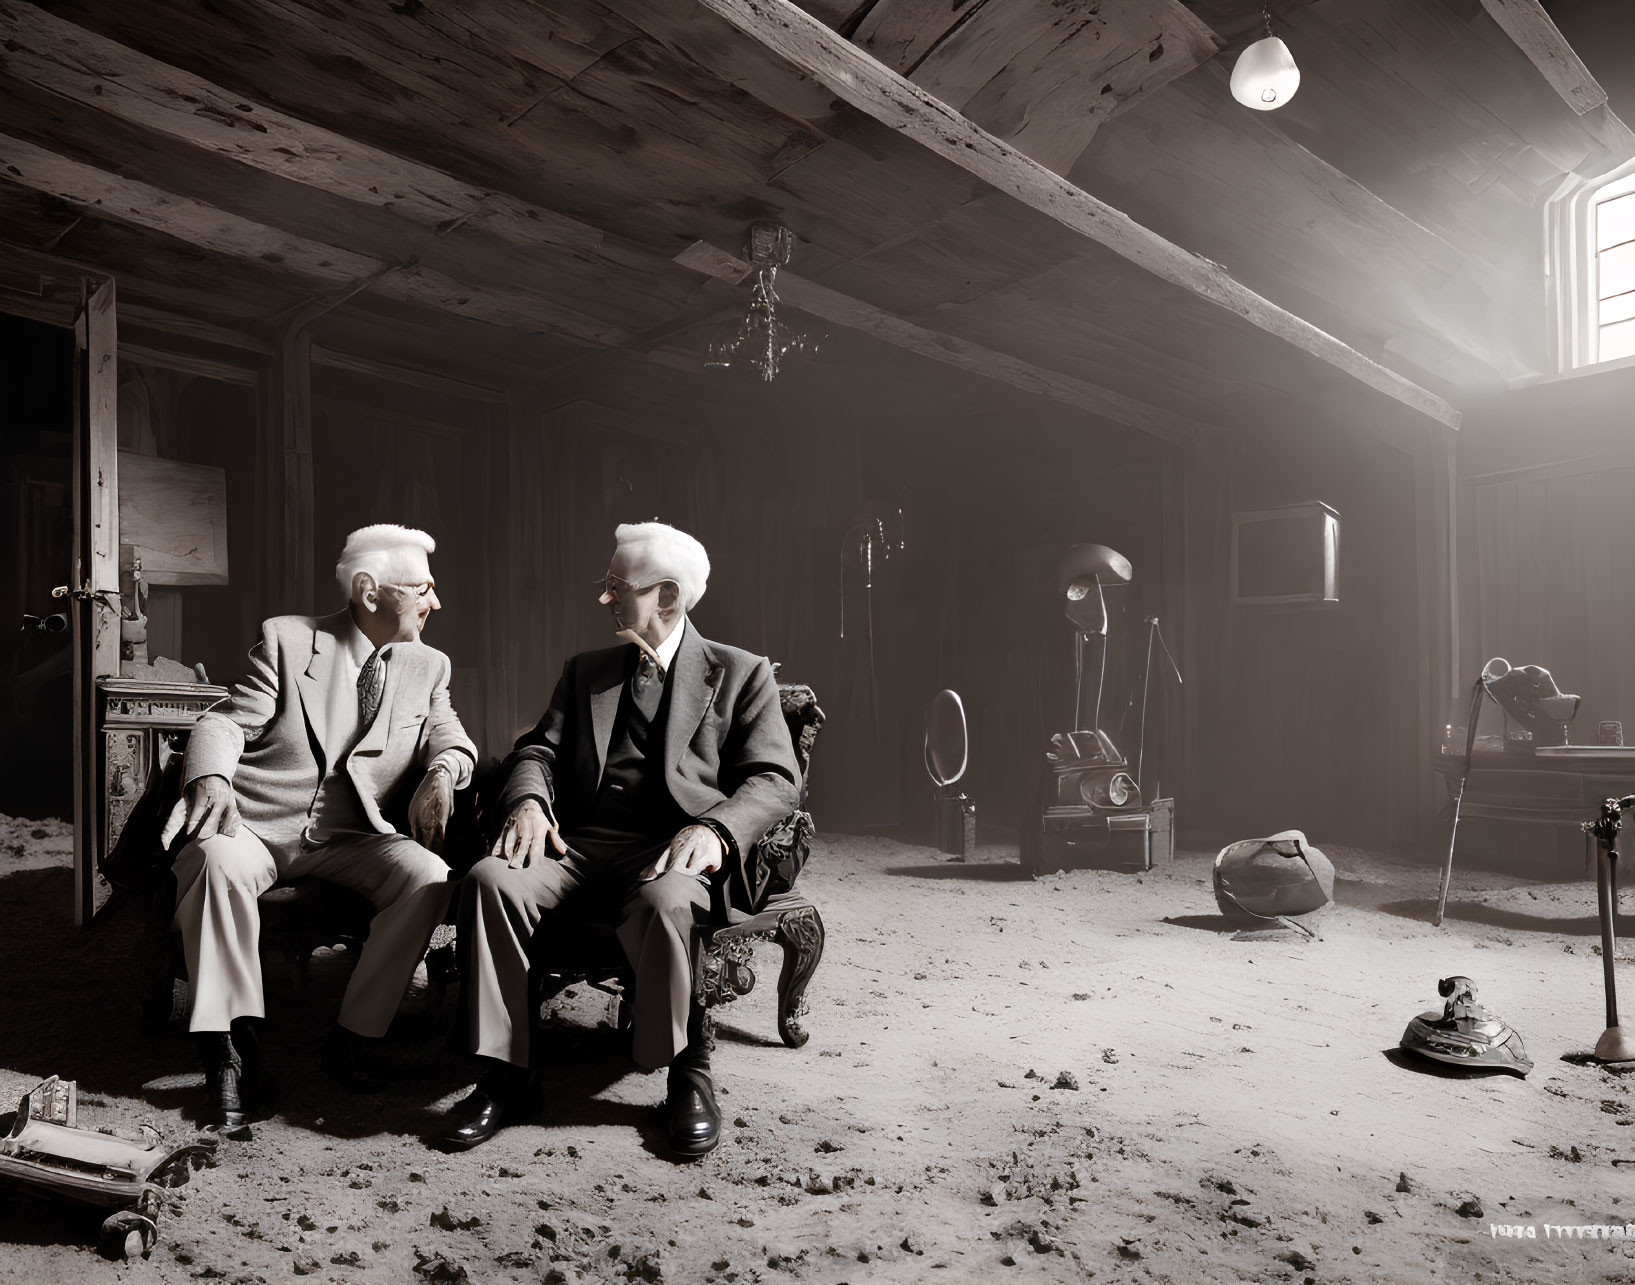 Elderly men in suits surrounded by vintage items in dusty attic